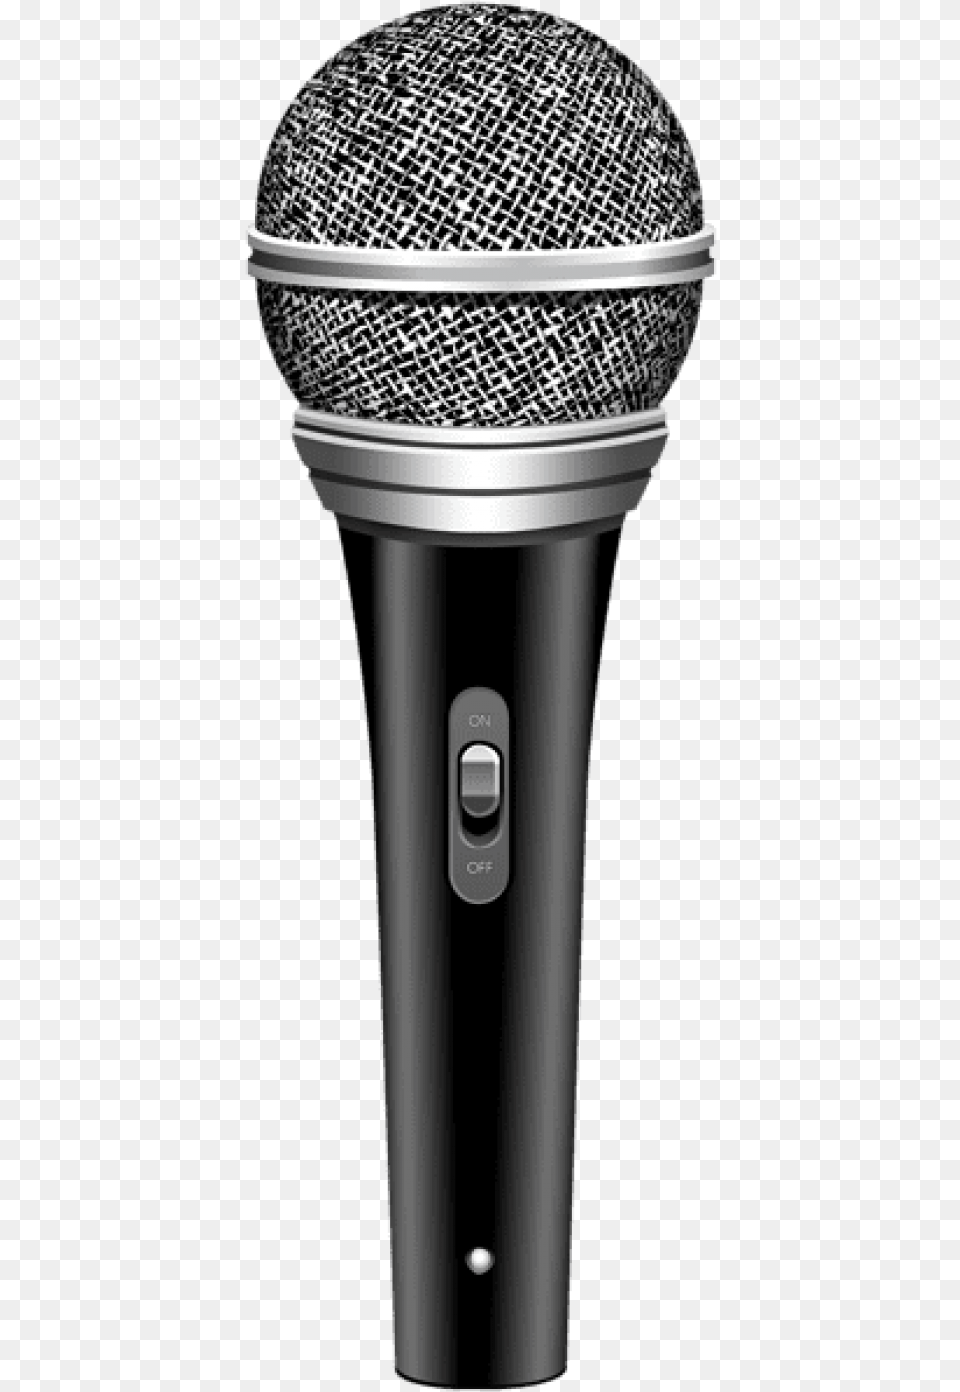 Microphone Images Background Public Address System, Electrical Device Png Image